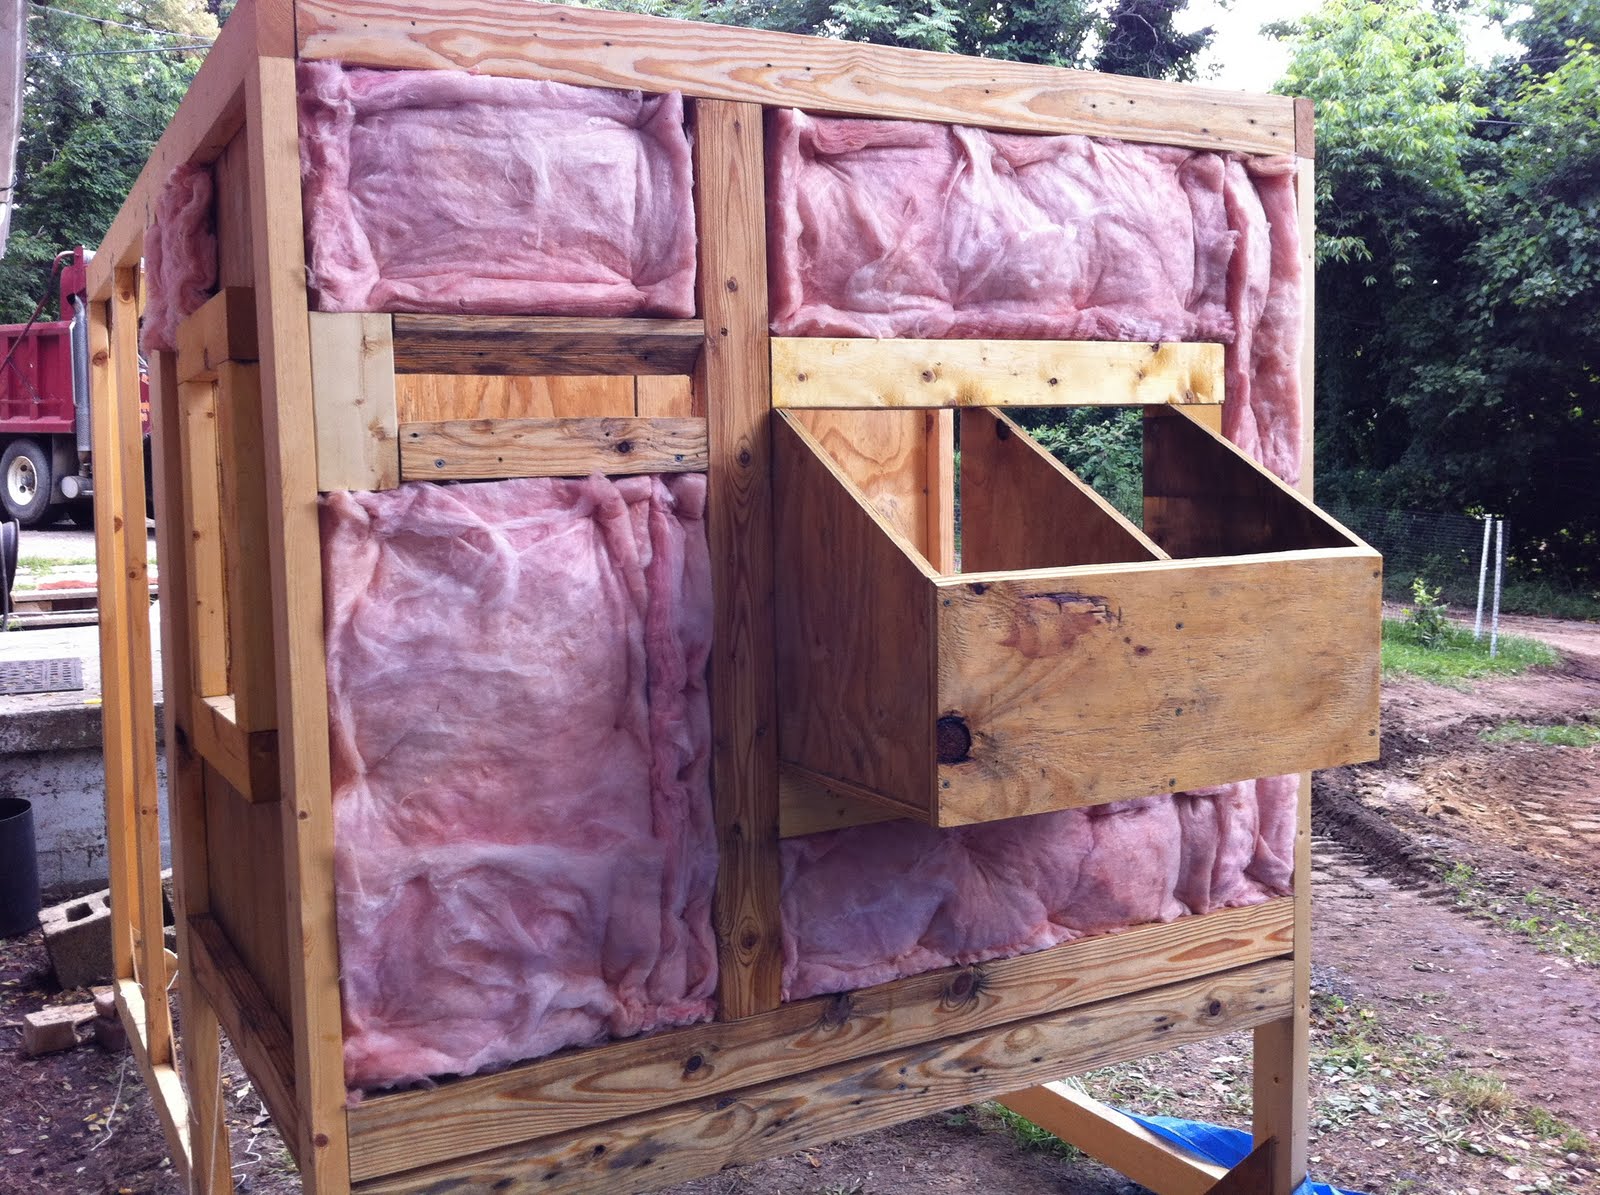 4 Ways To Insulate Your Chicken Coop For Extreme Weather Conditions